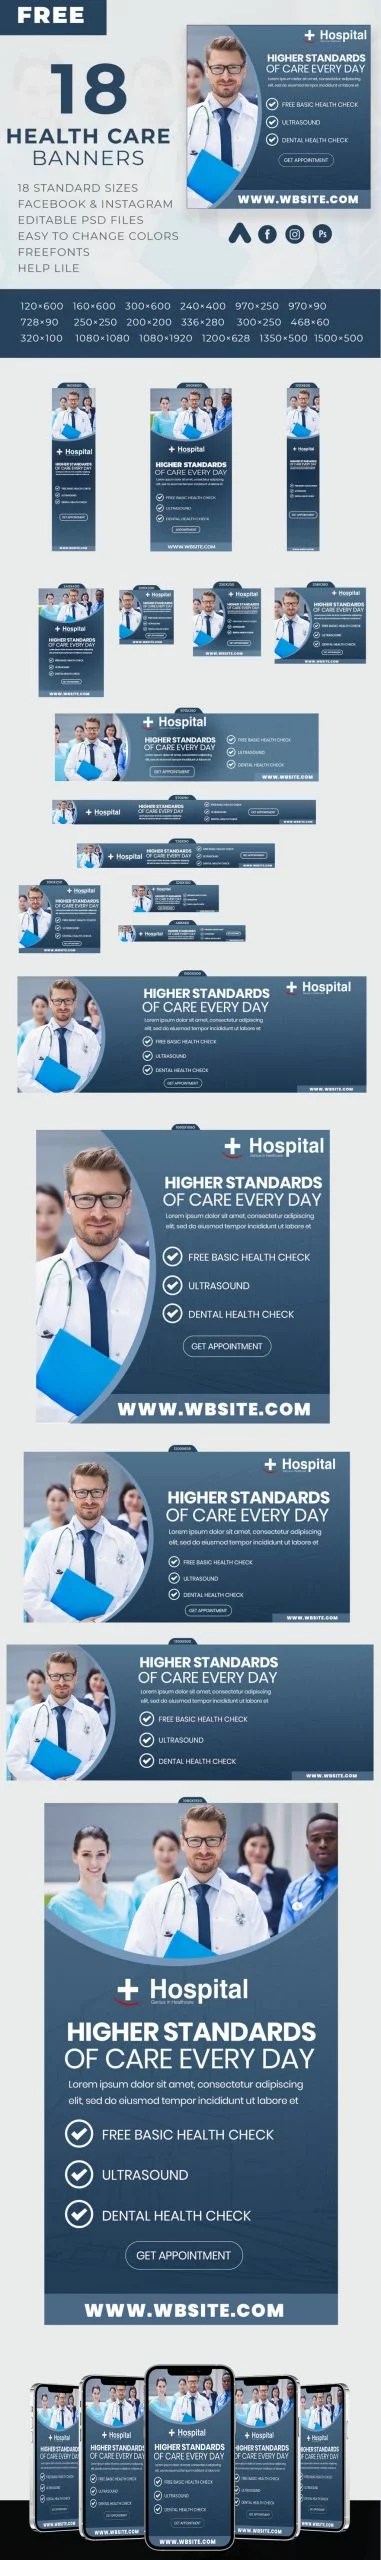 Free Healthcare Banners in PSD